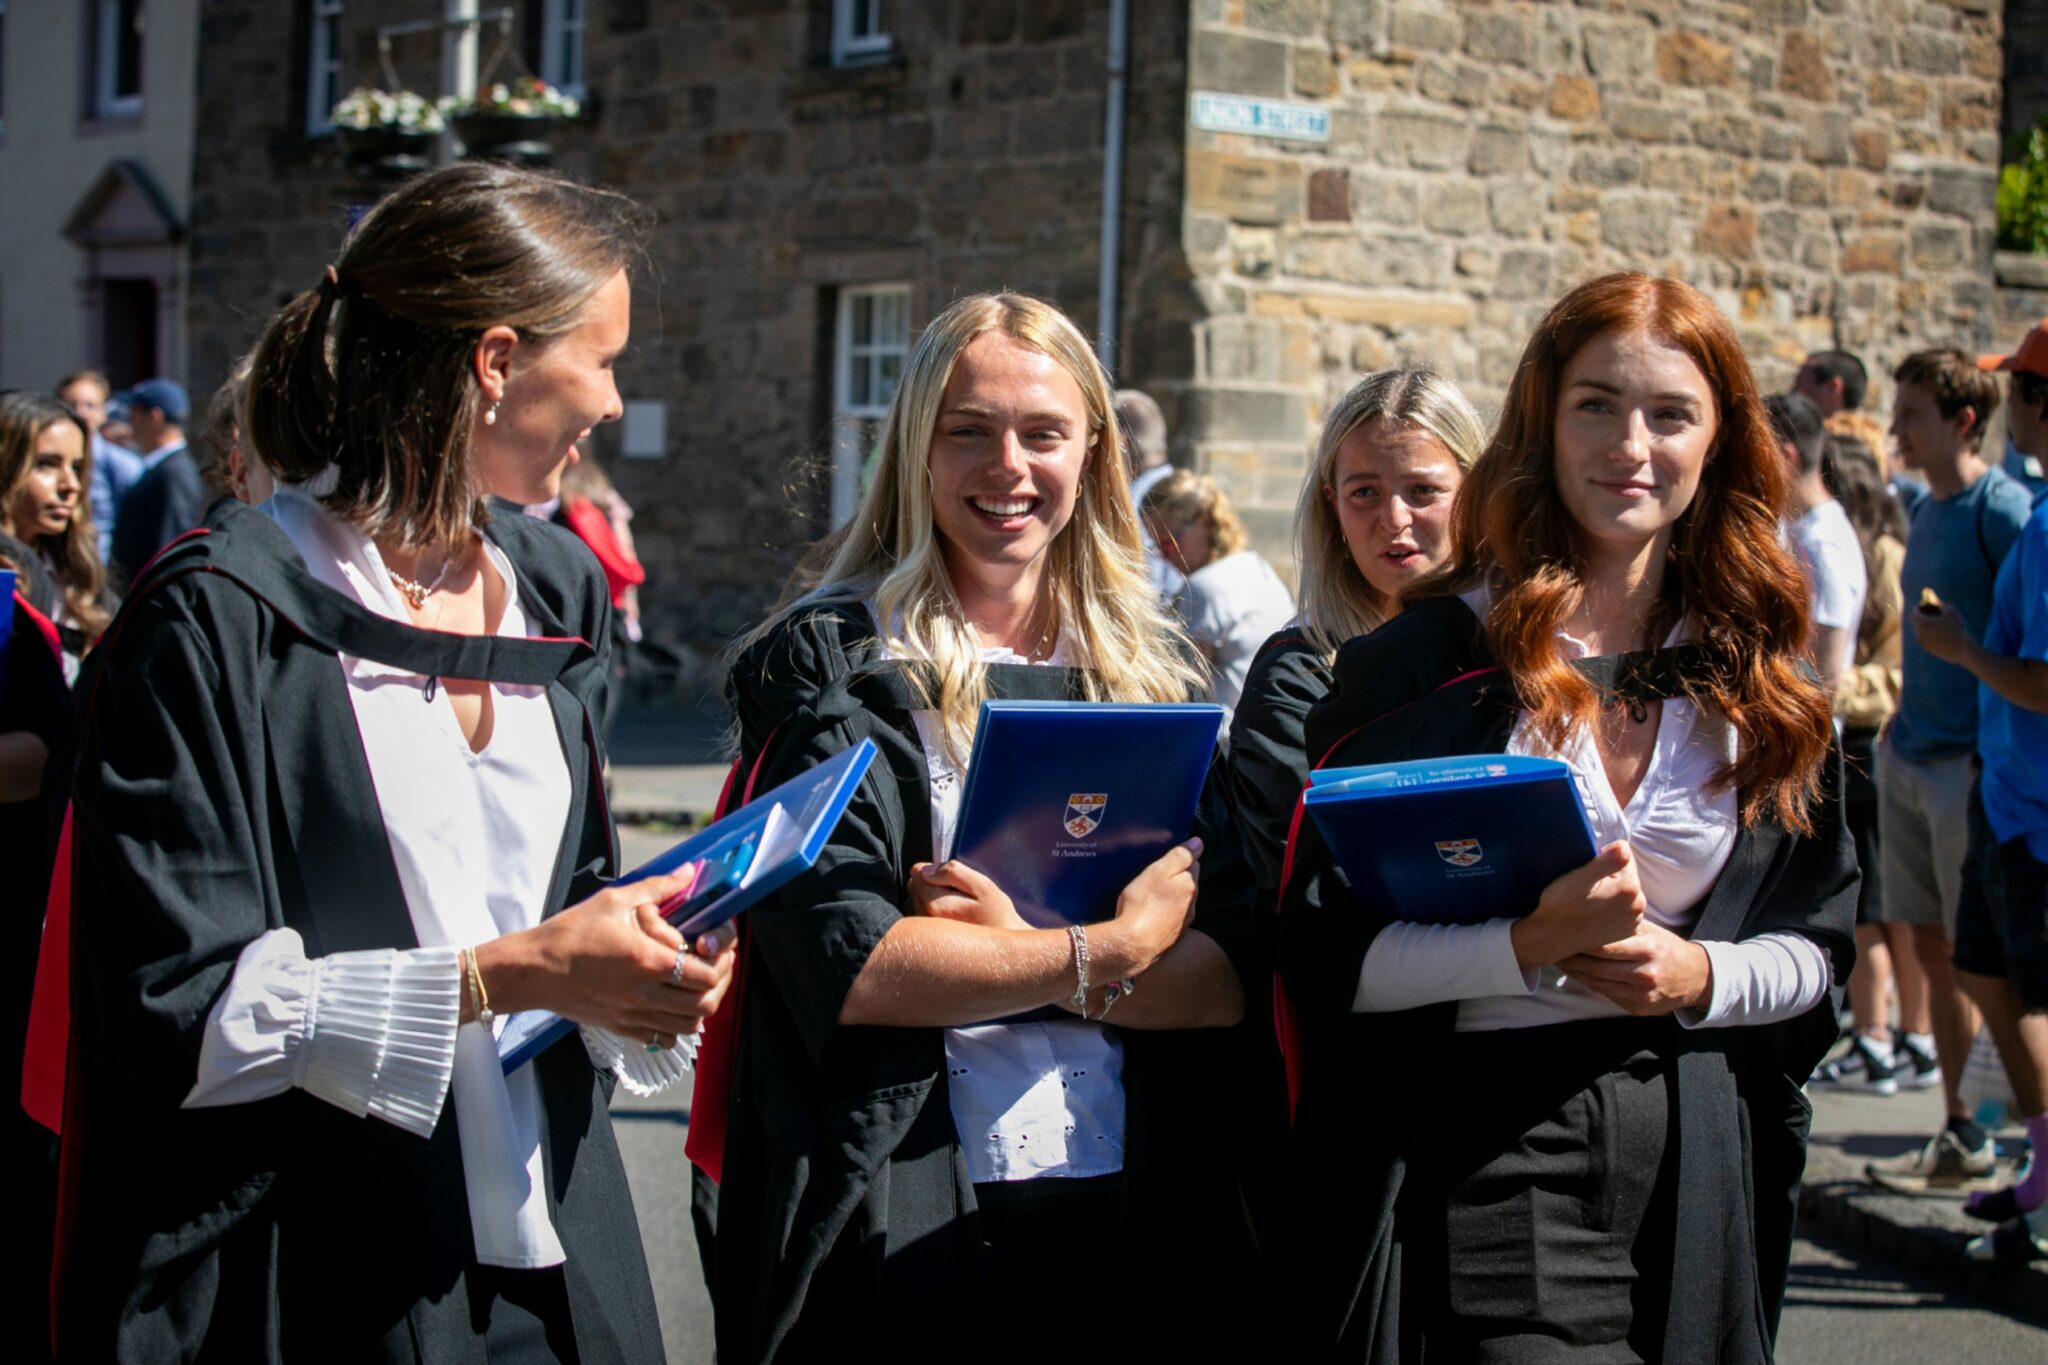 St Andrews University graduations 2023 Pictures from day four